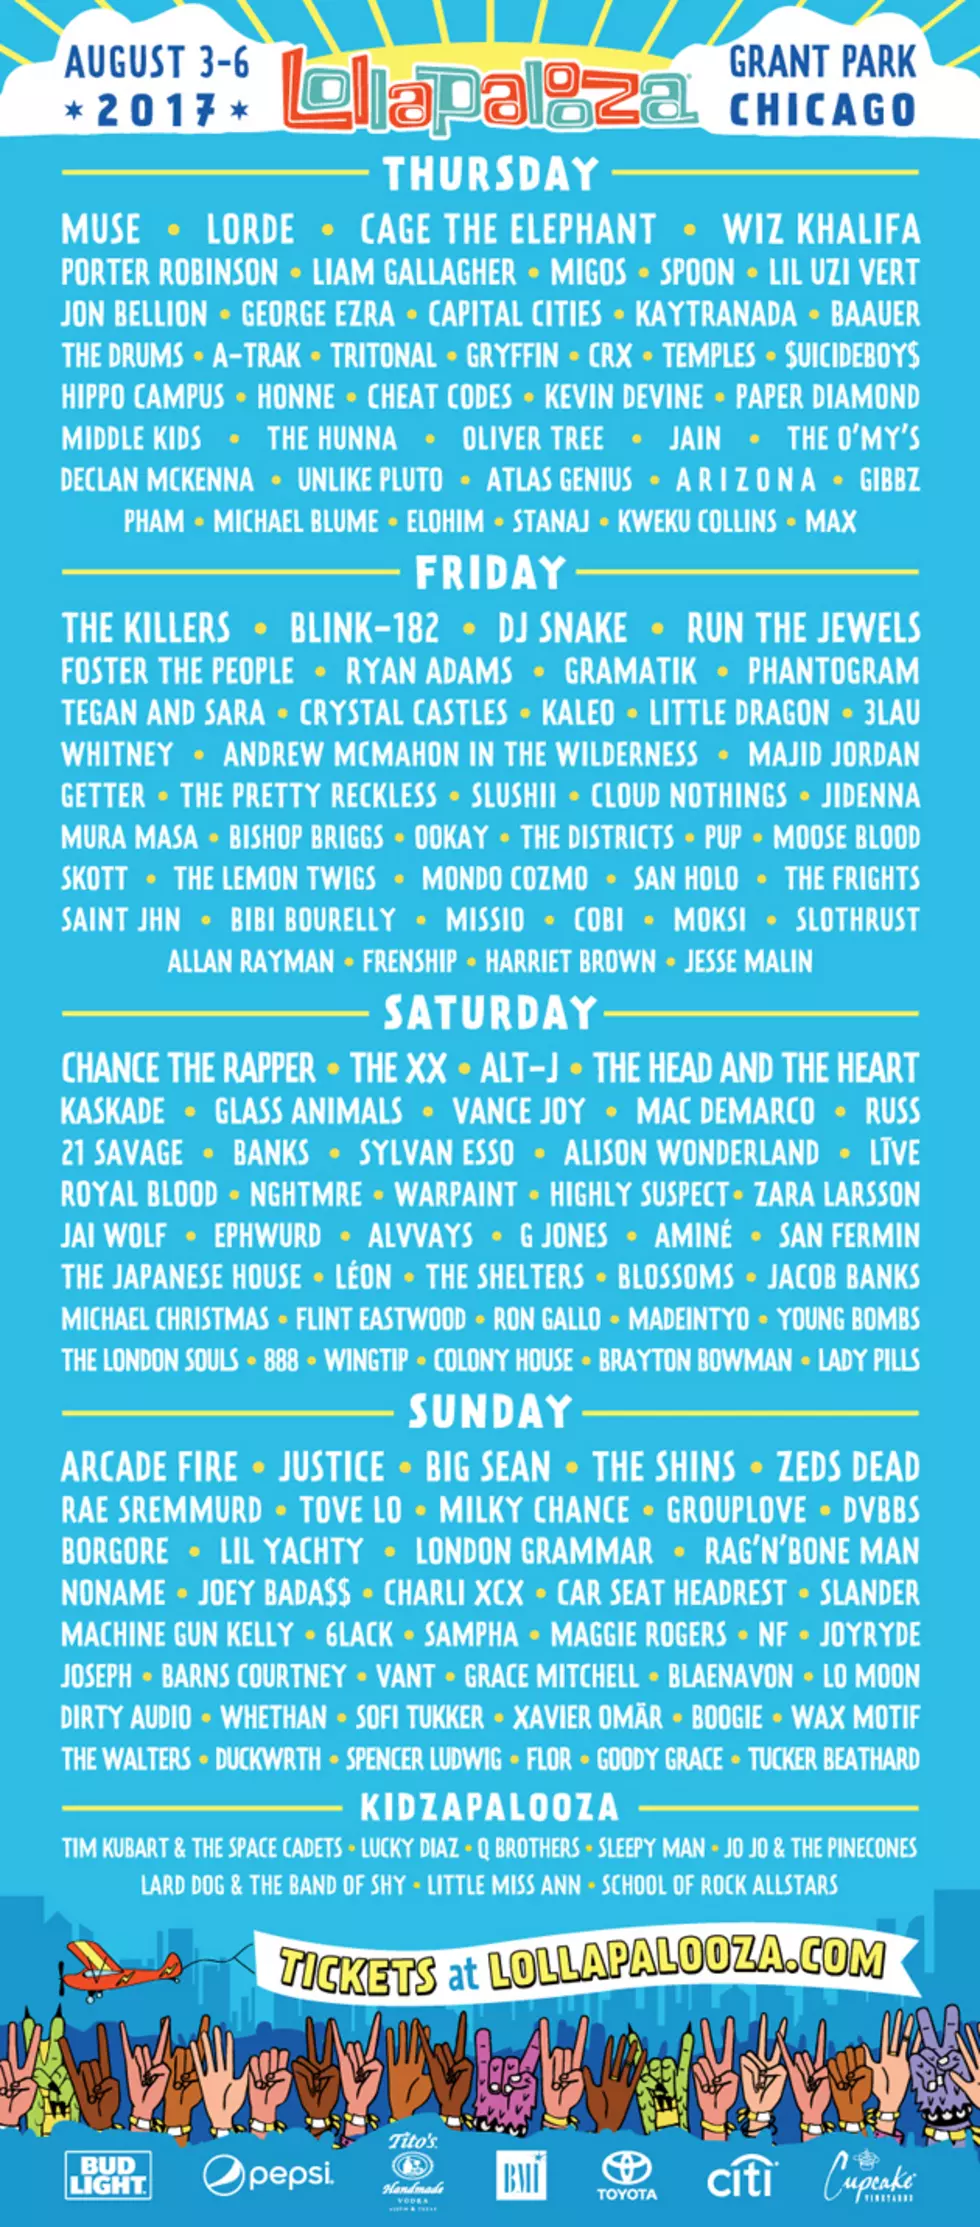 Full Lollapalooza 2017 Lineup Revealed: Arcade Fire, Muse, Chance the Rapper and the Killers Headline